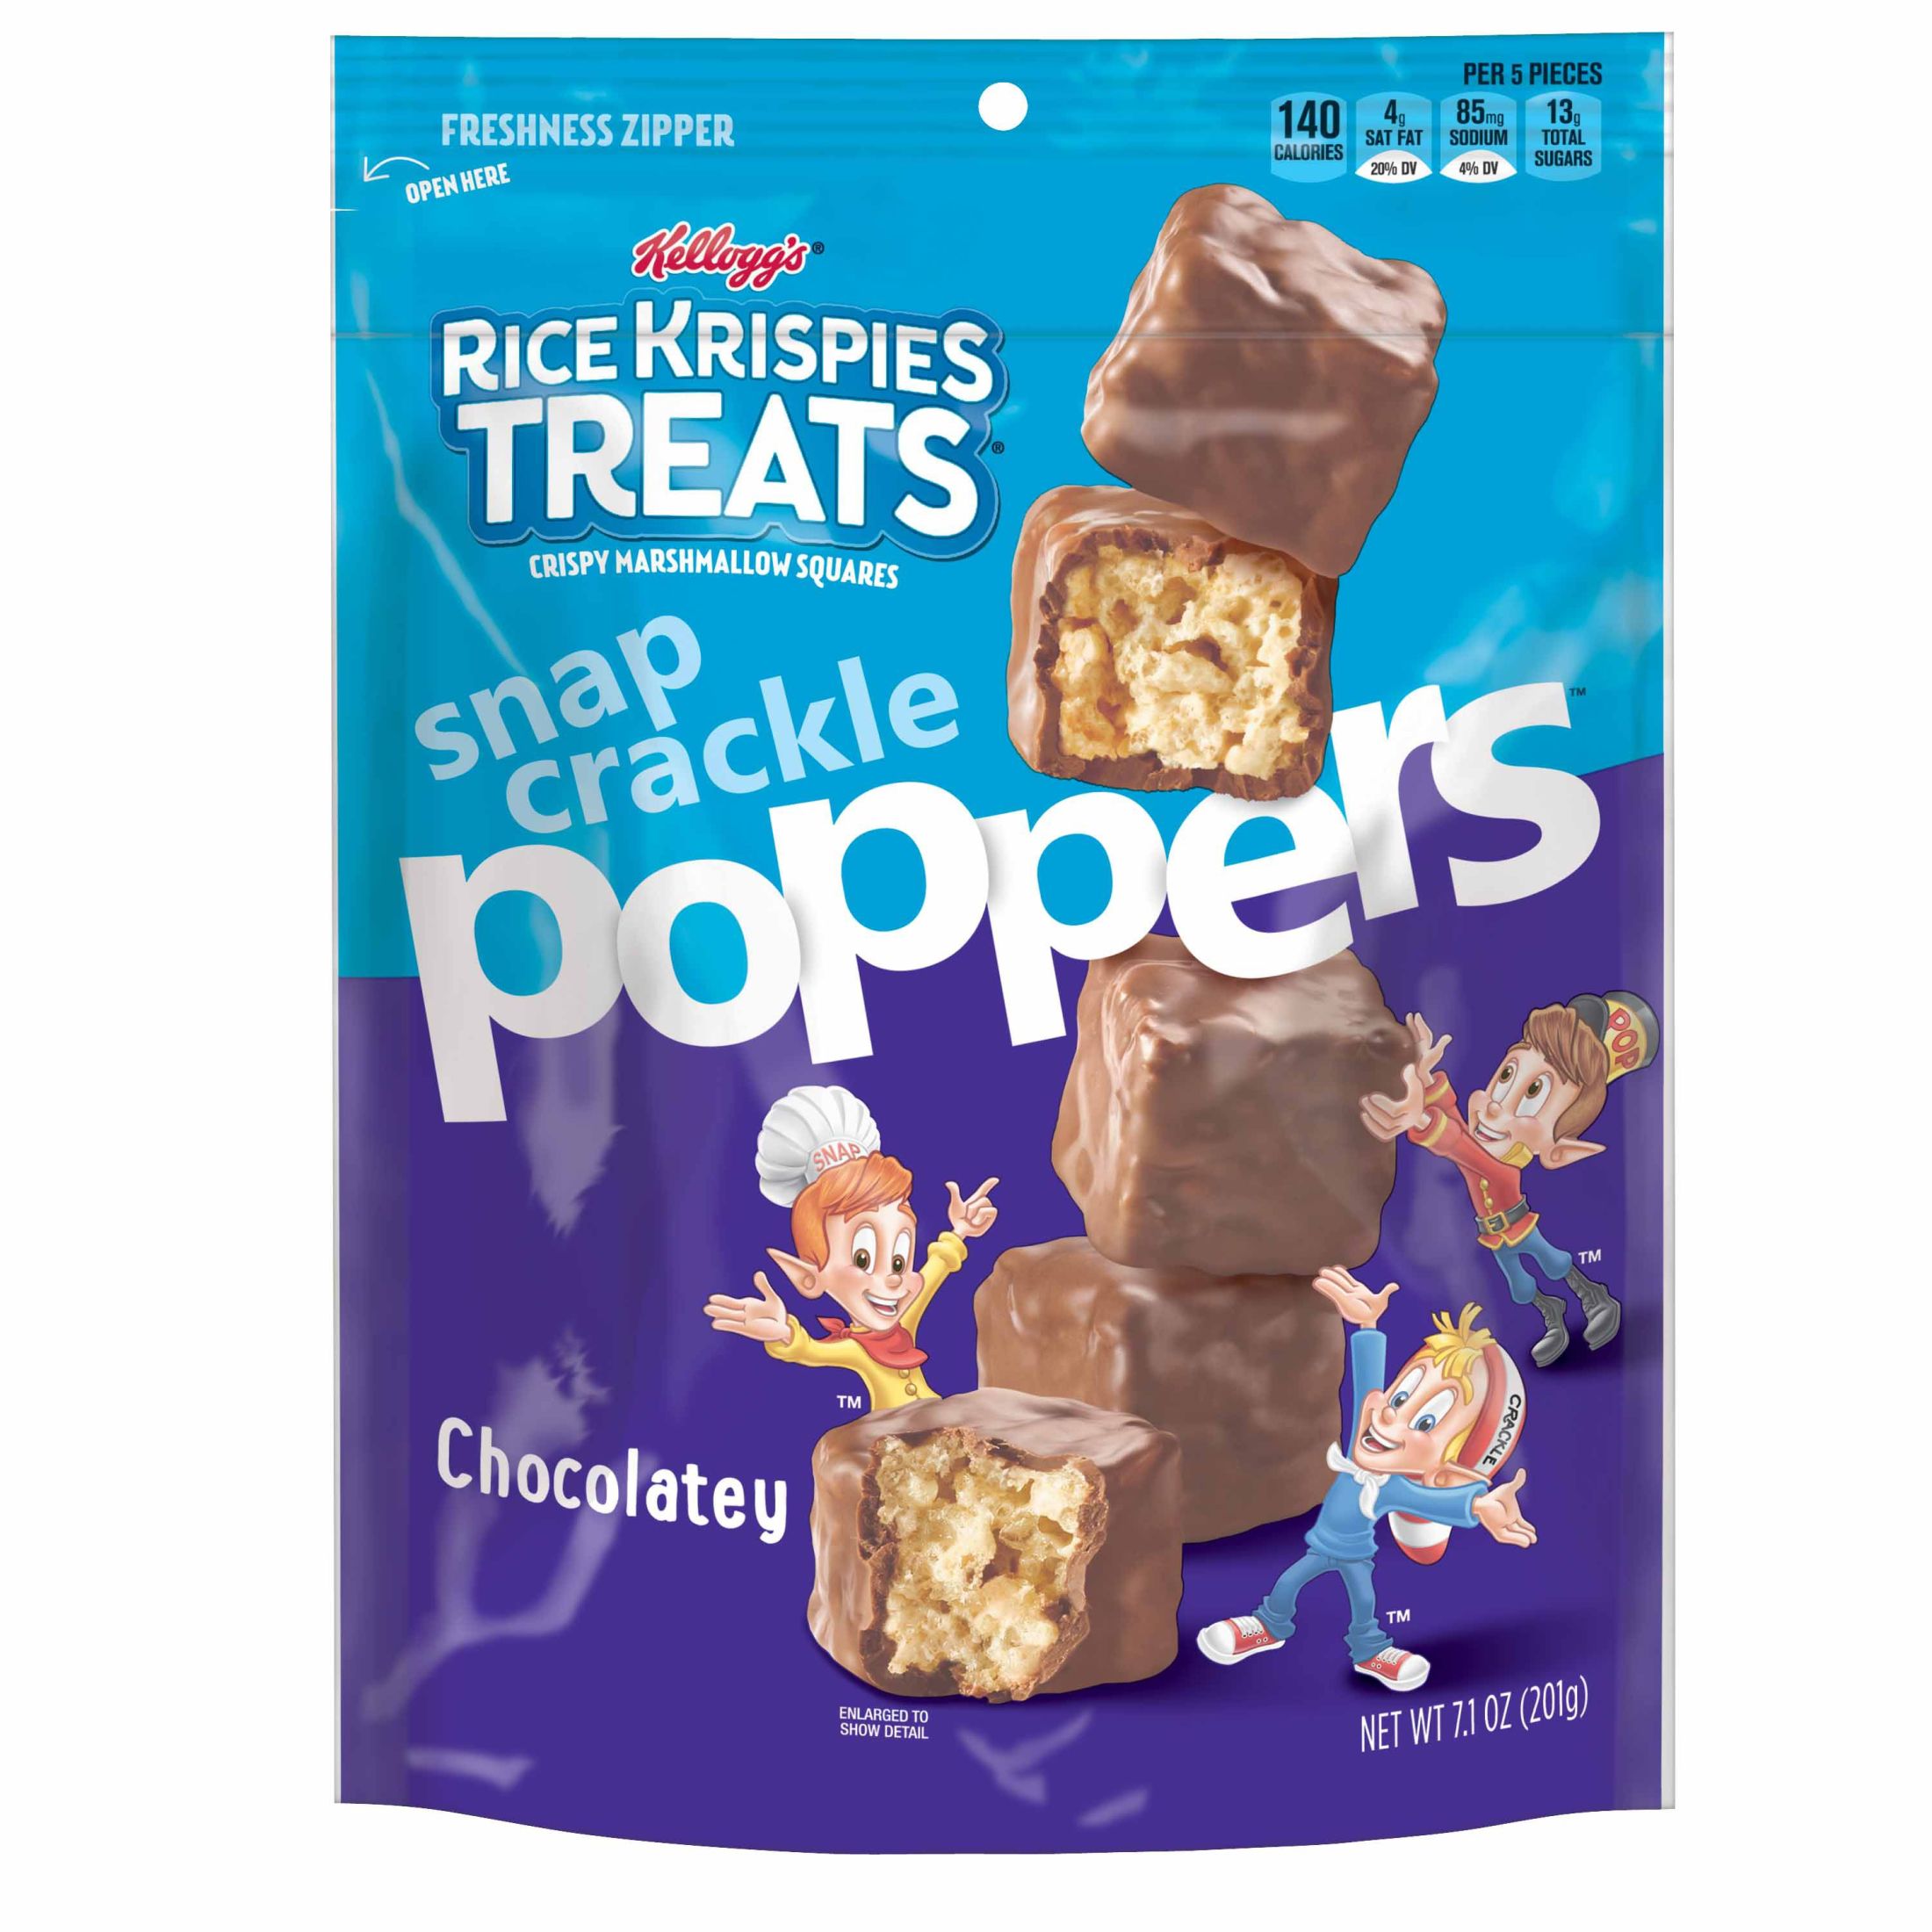 Rice Krispies Treats Poppers Chocolatey Chewy Crispy Marshmallow Squares, 7.1 oz - image 1 of 8